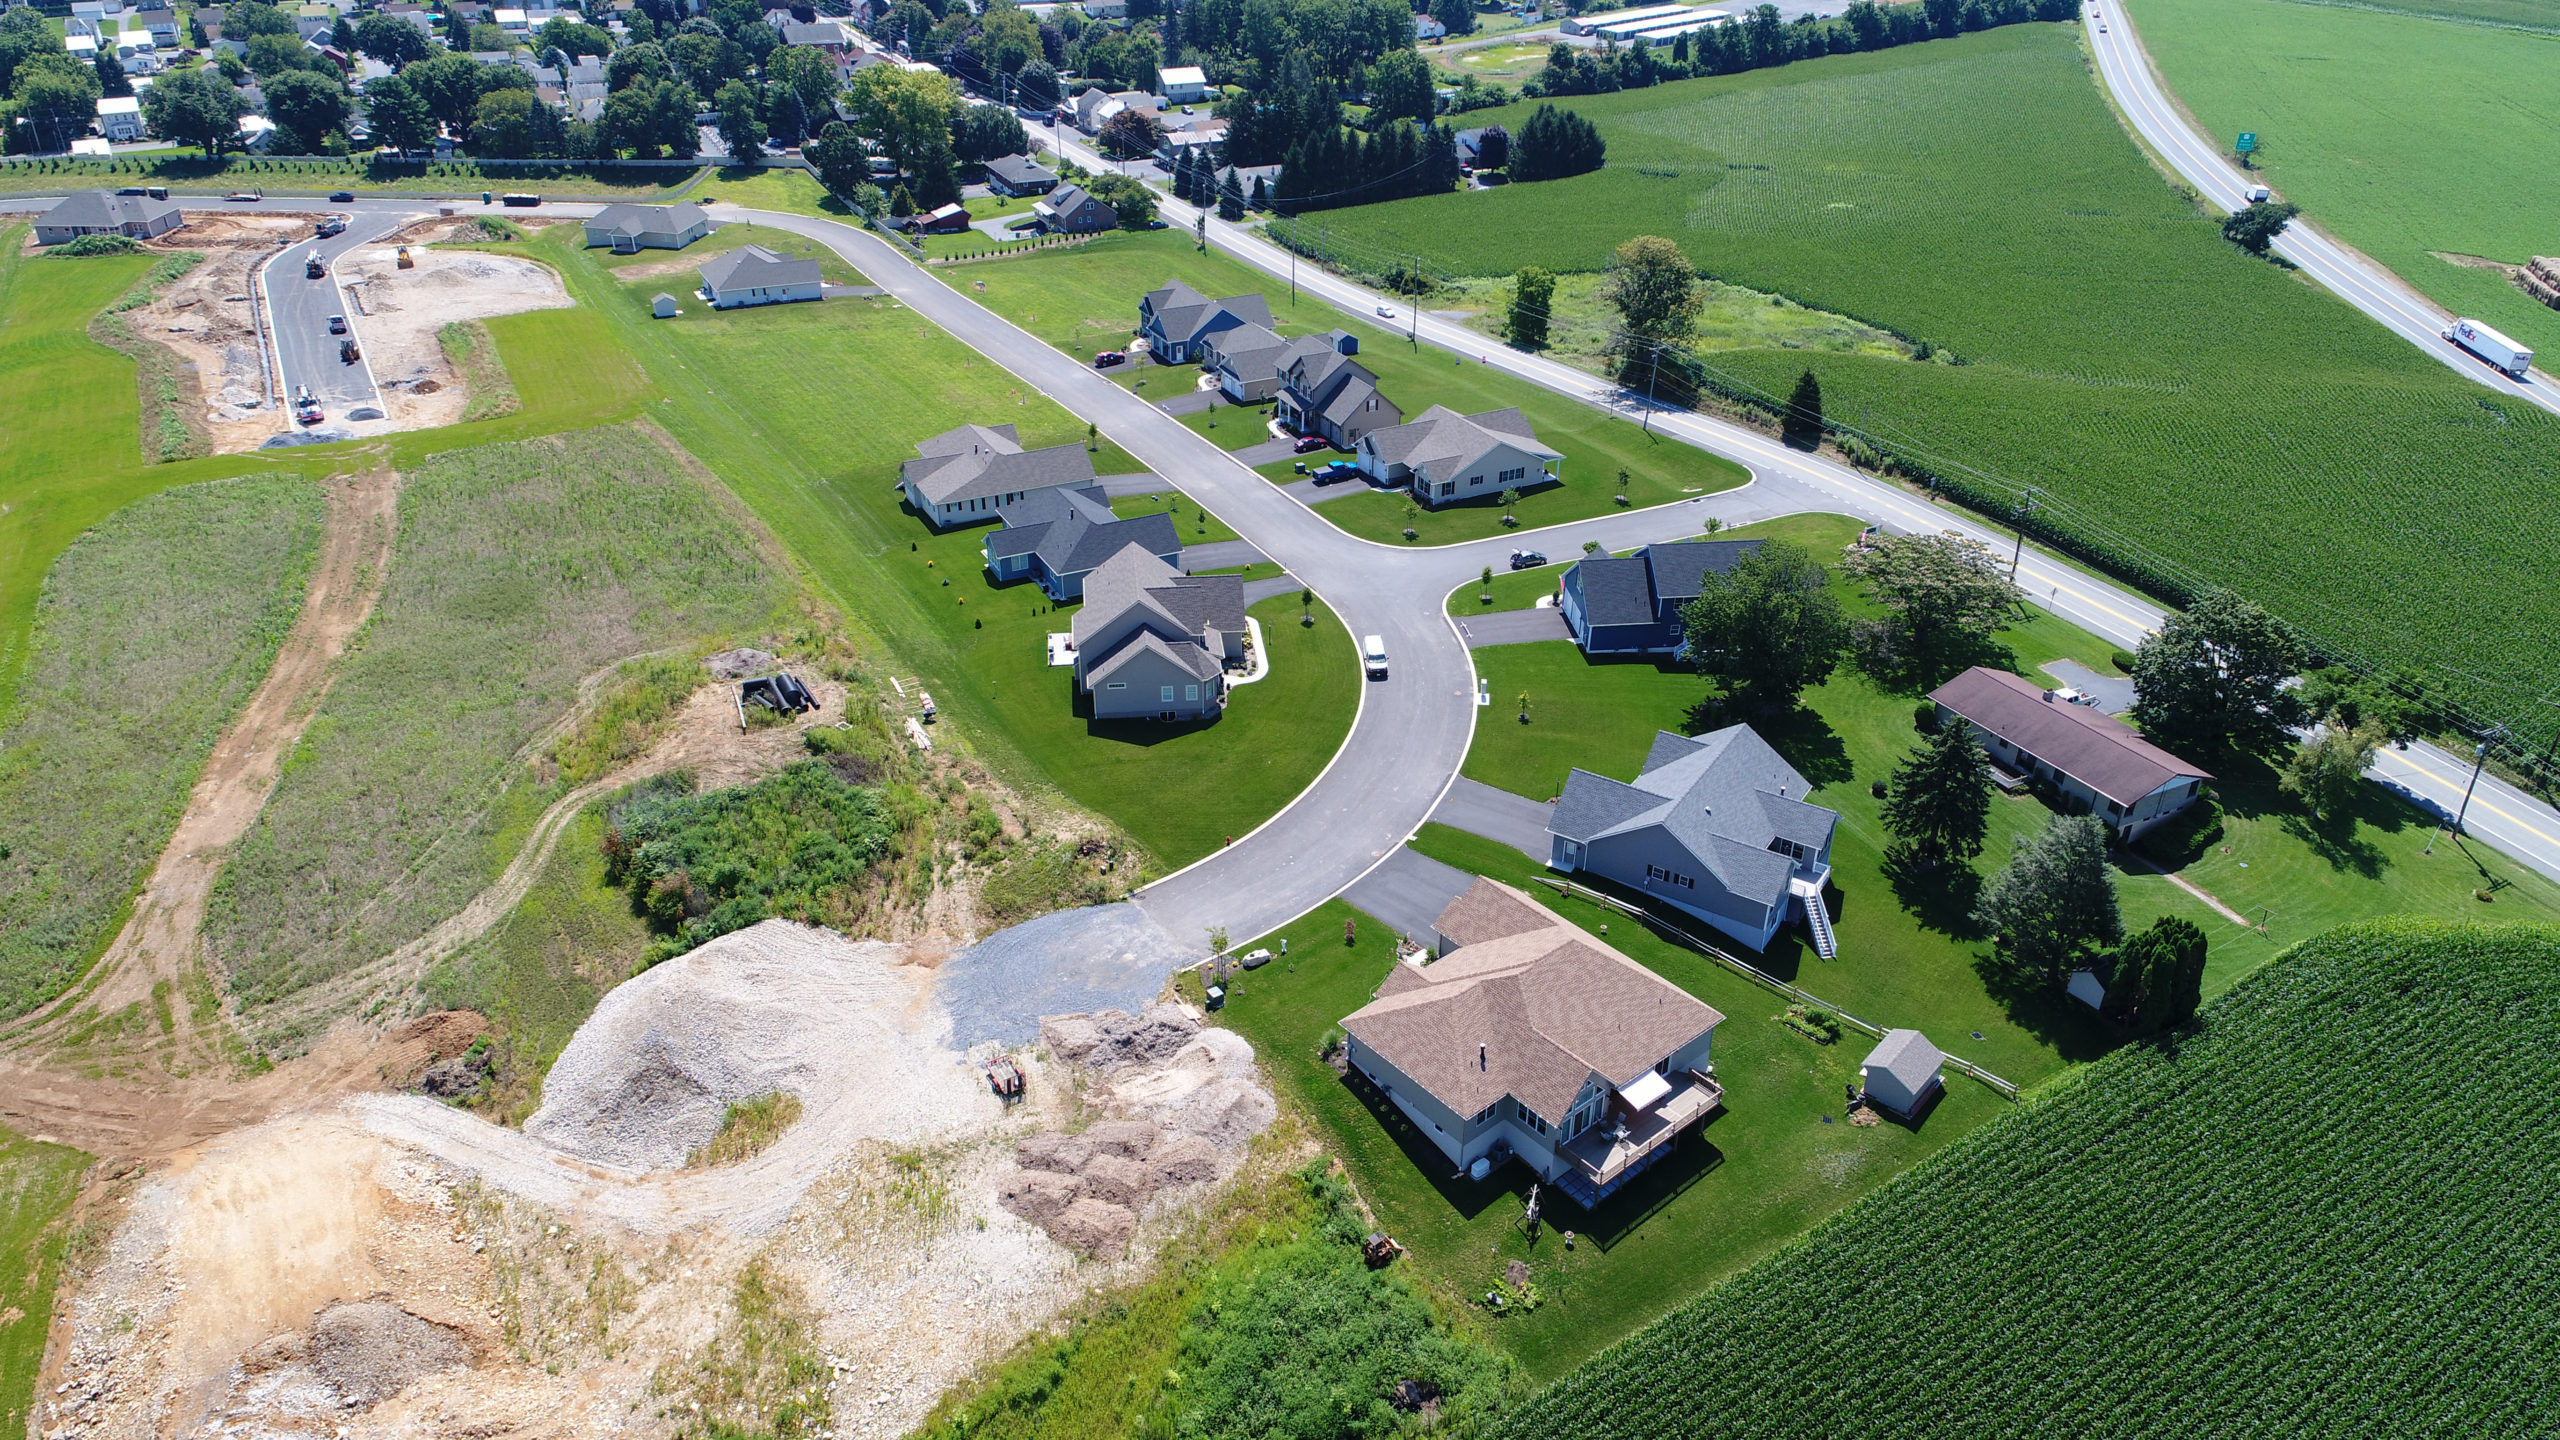 Aerial photo of Scenic Ridge at Cornwall showing roads, houses, surrounding fields and trees